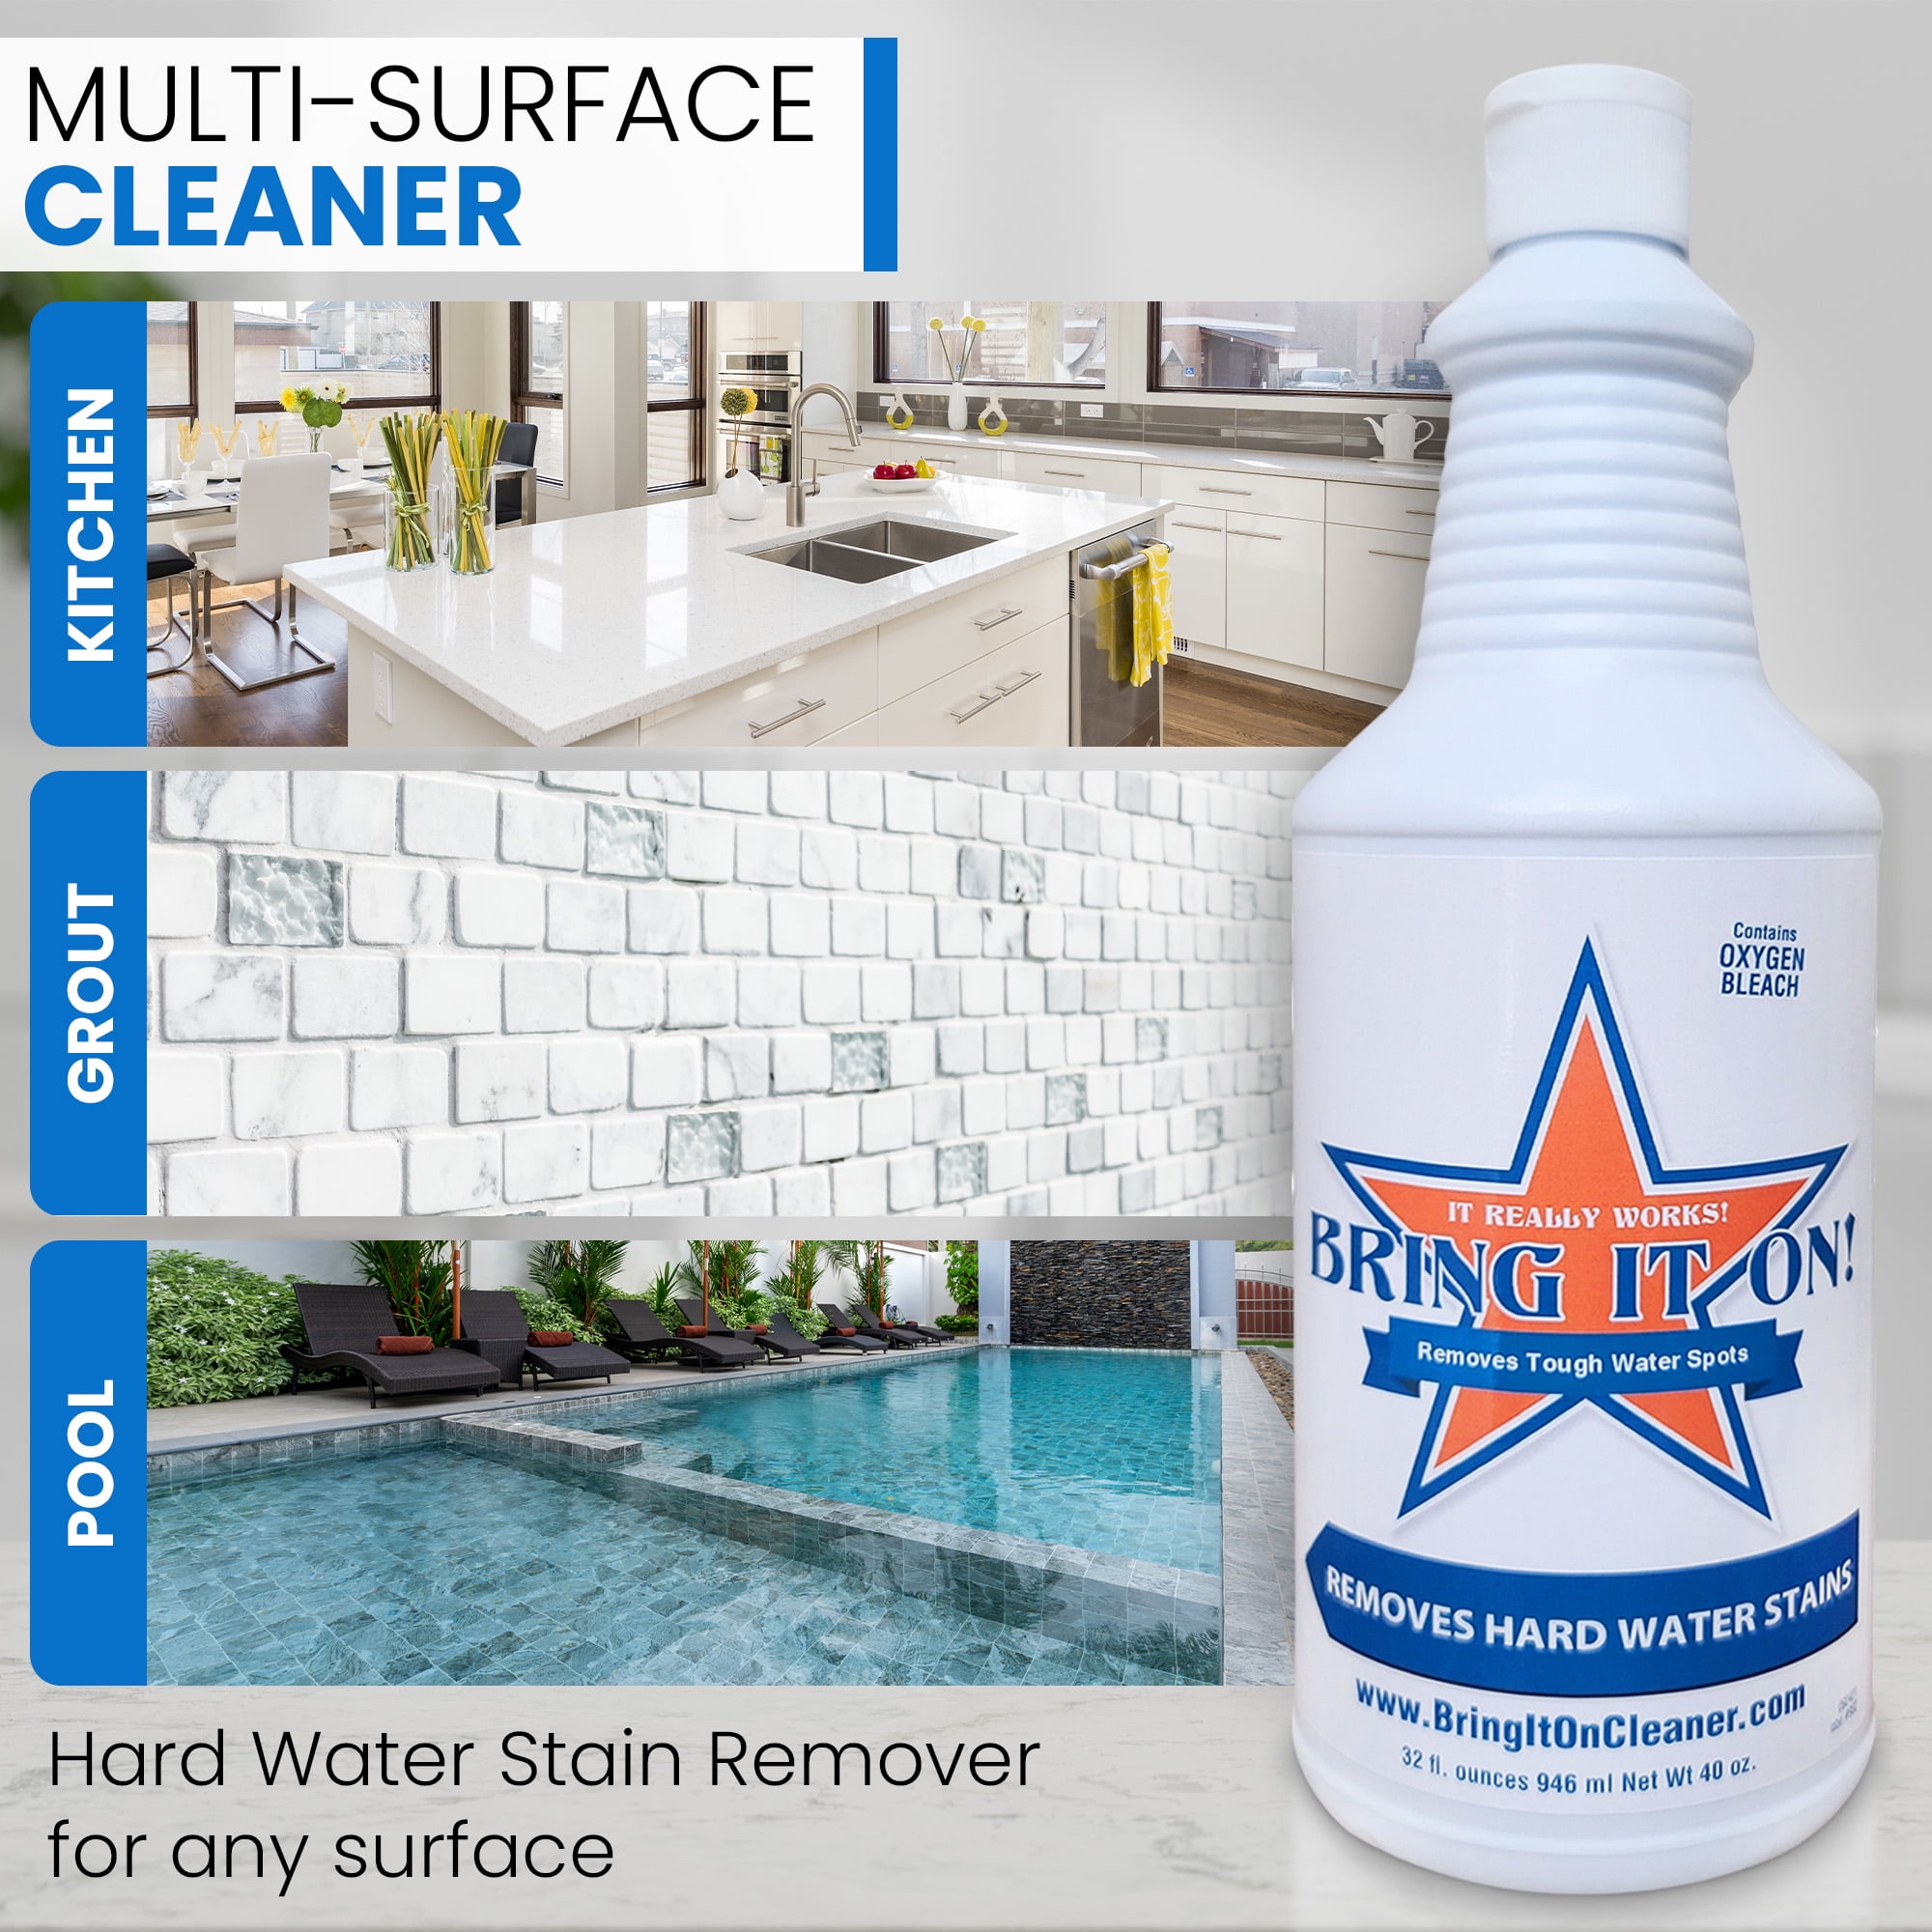 Bring It On Cleaner: Shower Door Hard Water Spot Stain Remover with OXYGEN  BLEACH. Safely Clean Shower Door Glass, Tiles, Taps, Grout and Fiberglass